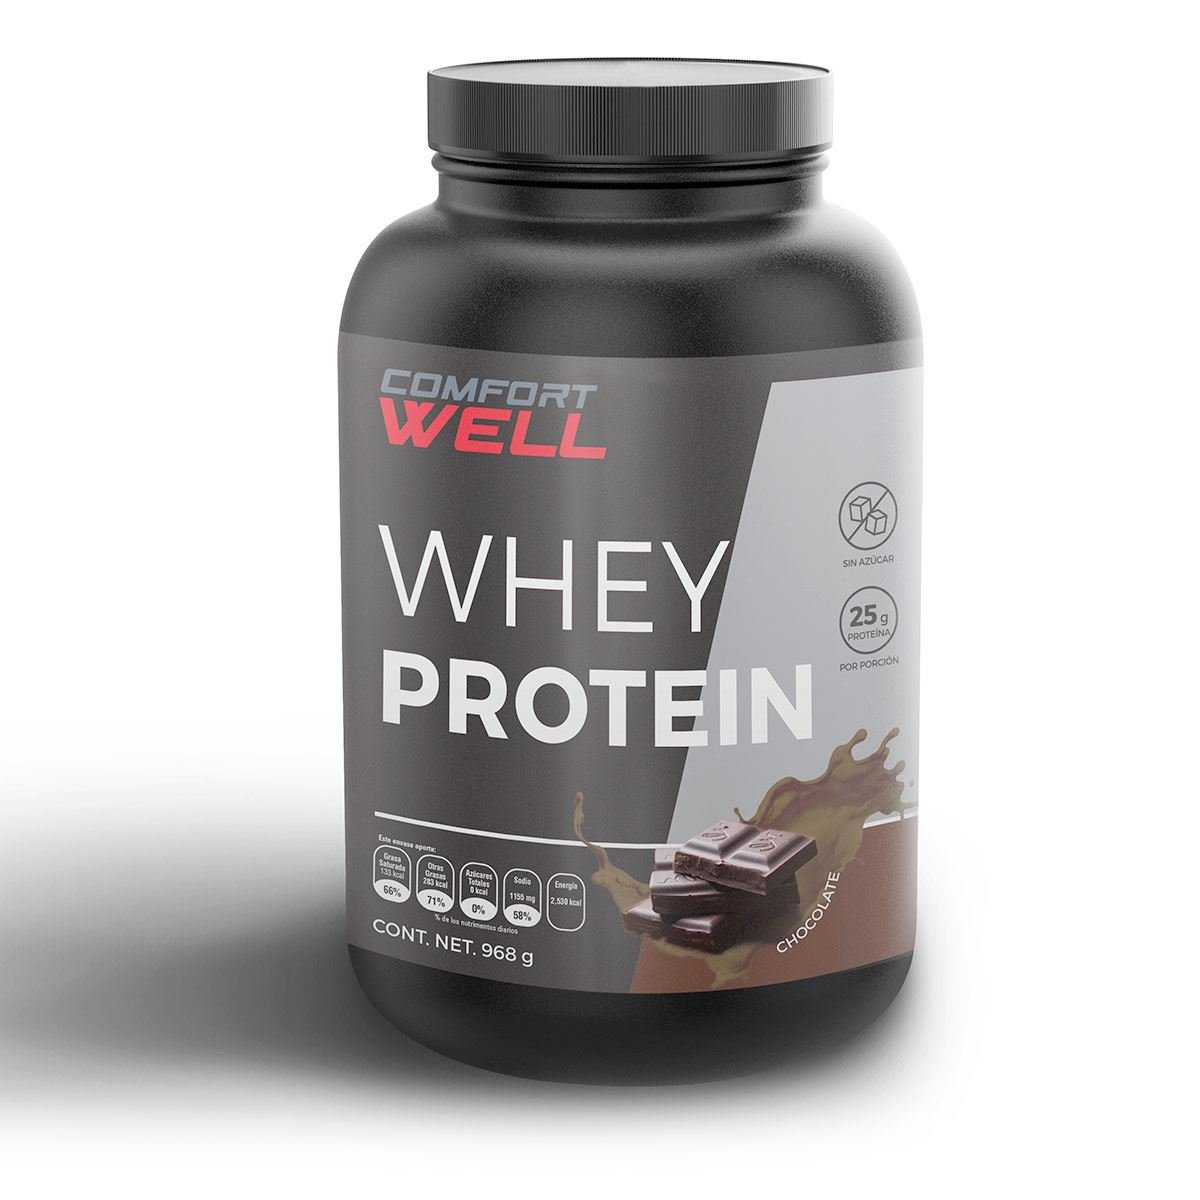 Proteína sabor chocolate (Whey Protein) Comfort Well